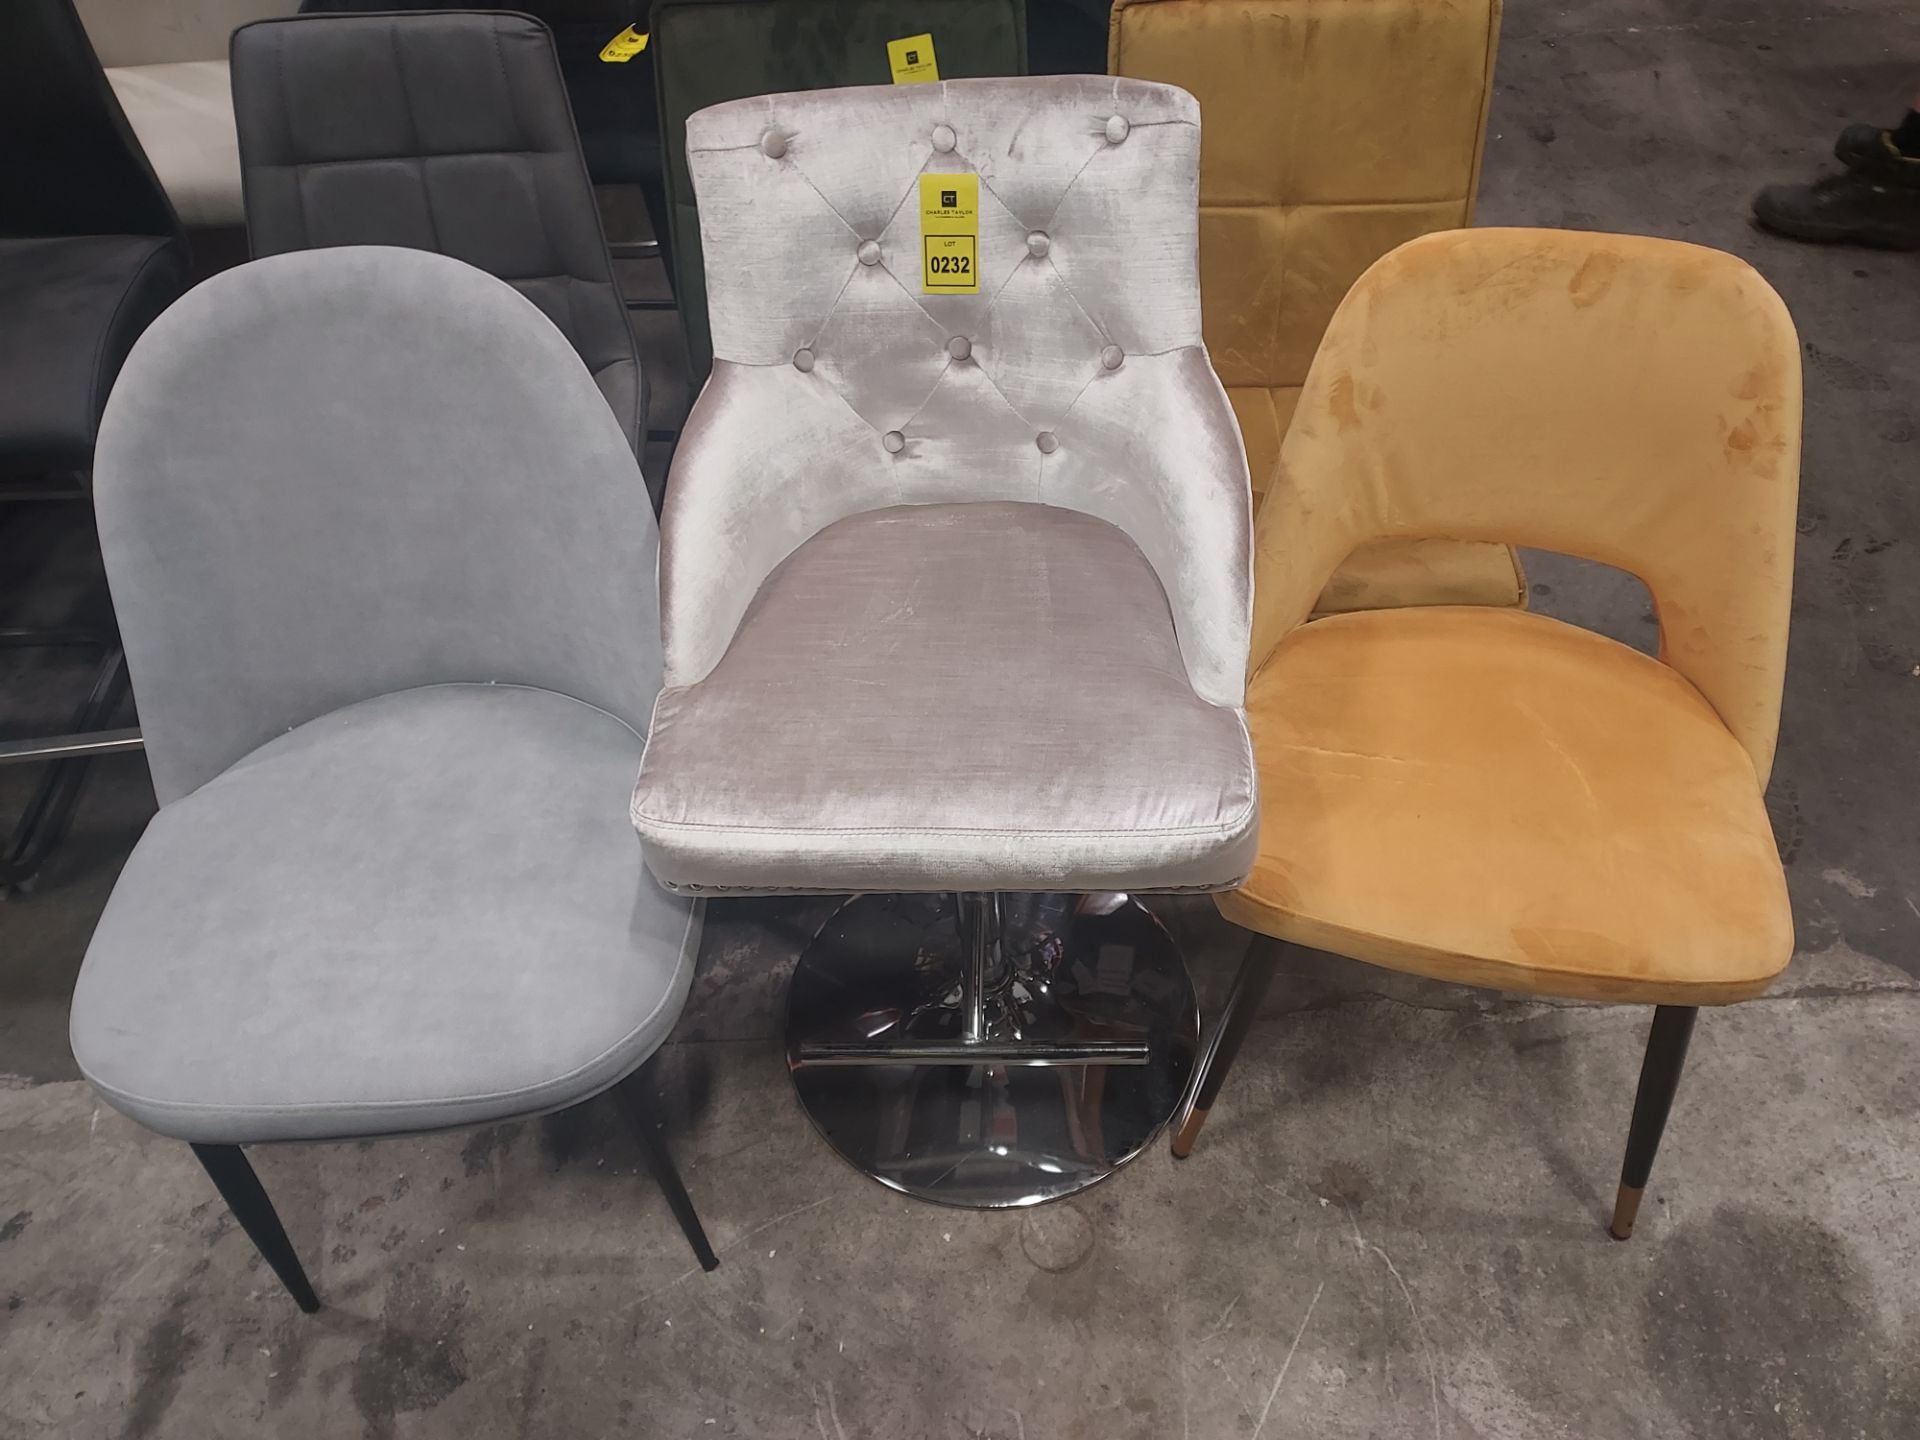 3 X MIXED CHAIR LOT CONTAINING - 1X BAR STOOL IN VELVET SILVER - 2X VELVET DINING CHAIRS